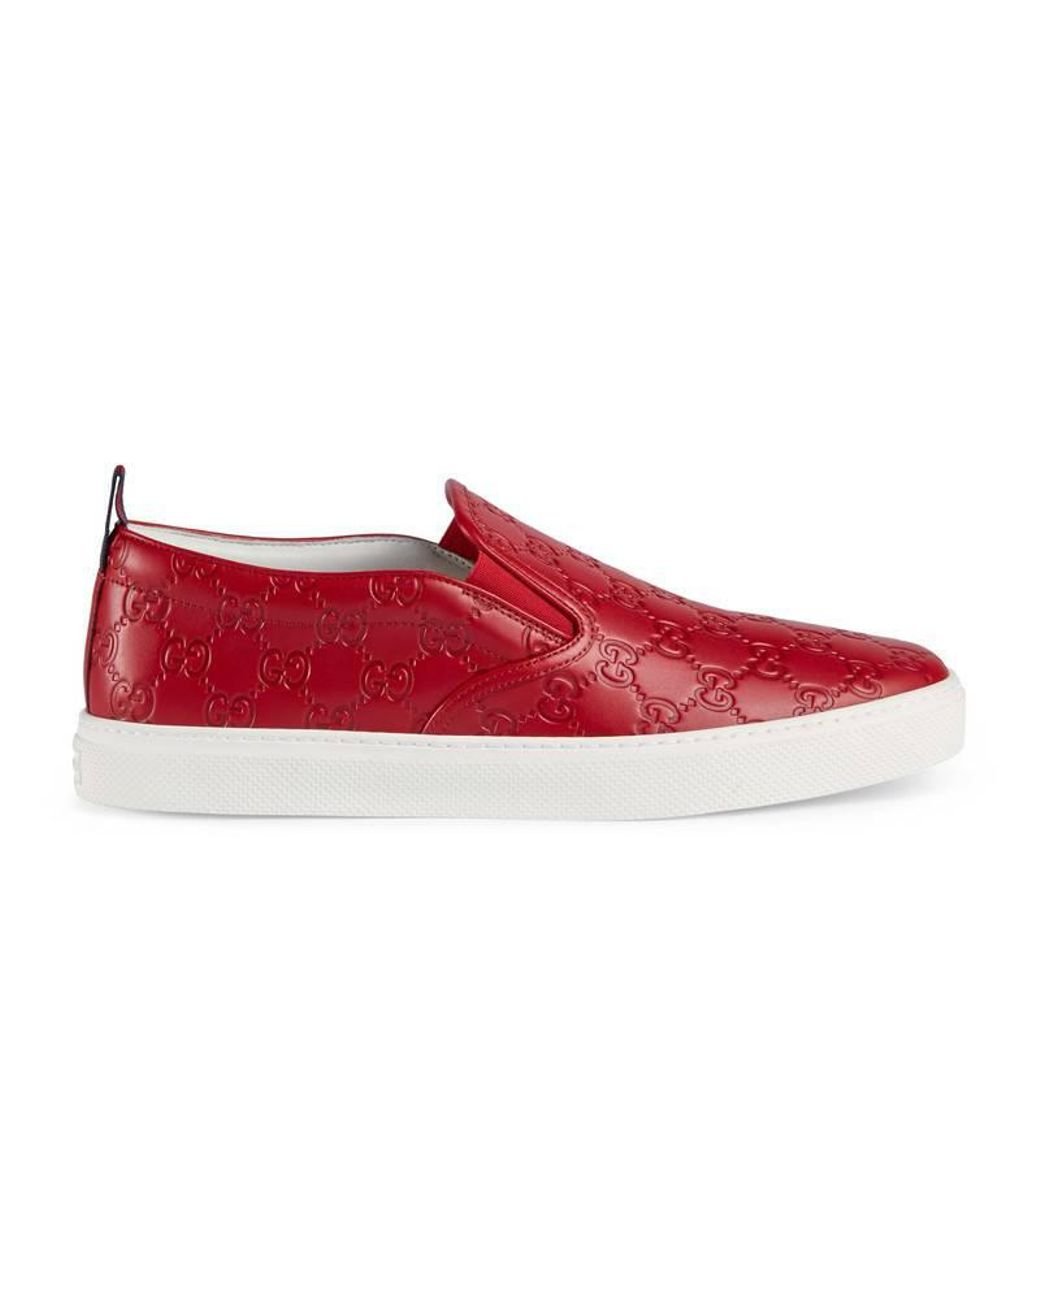 Gucci Signature Slip-on Sneaker in Red | Lyst